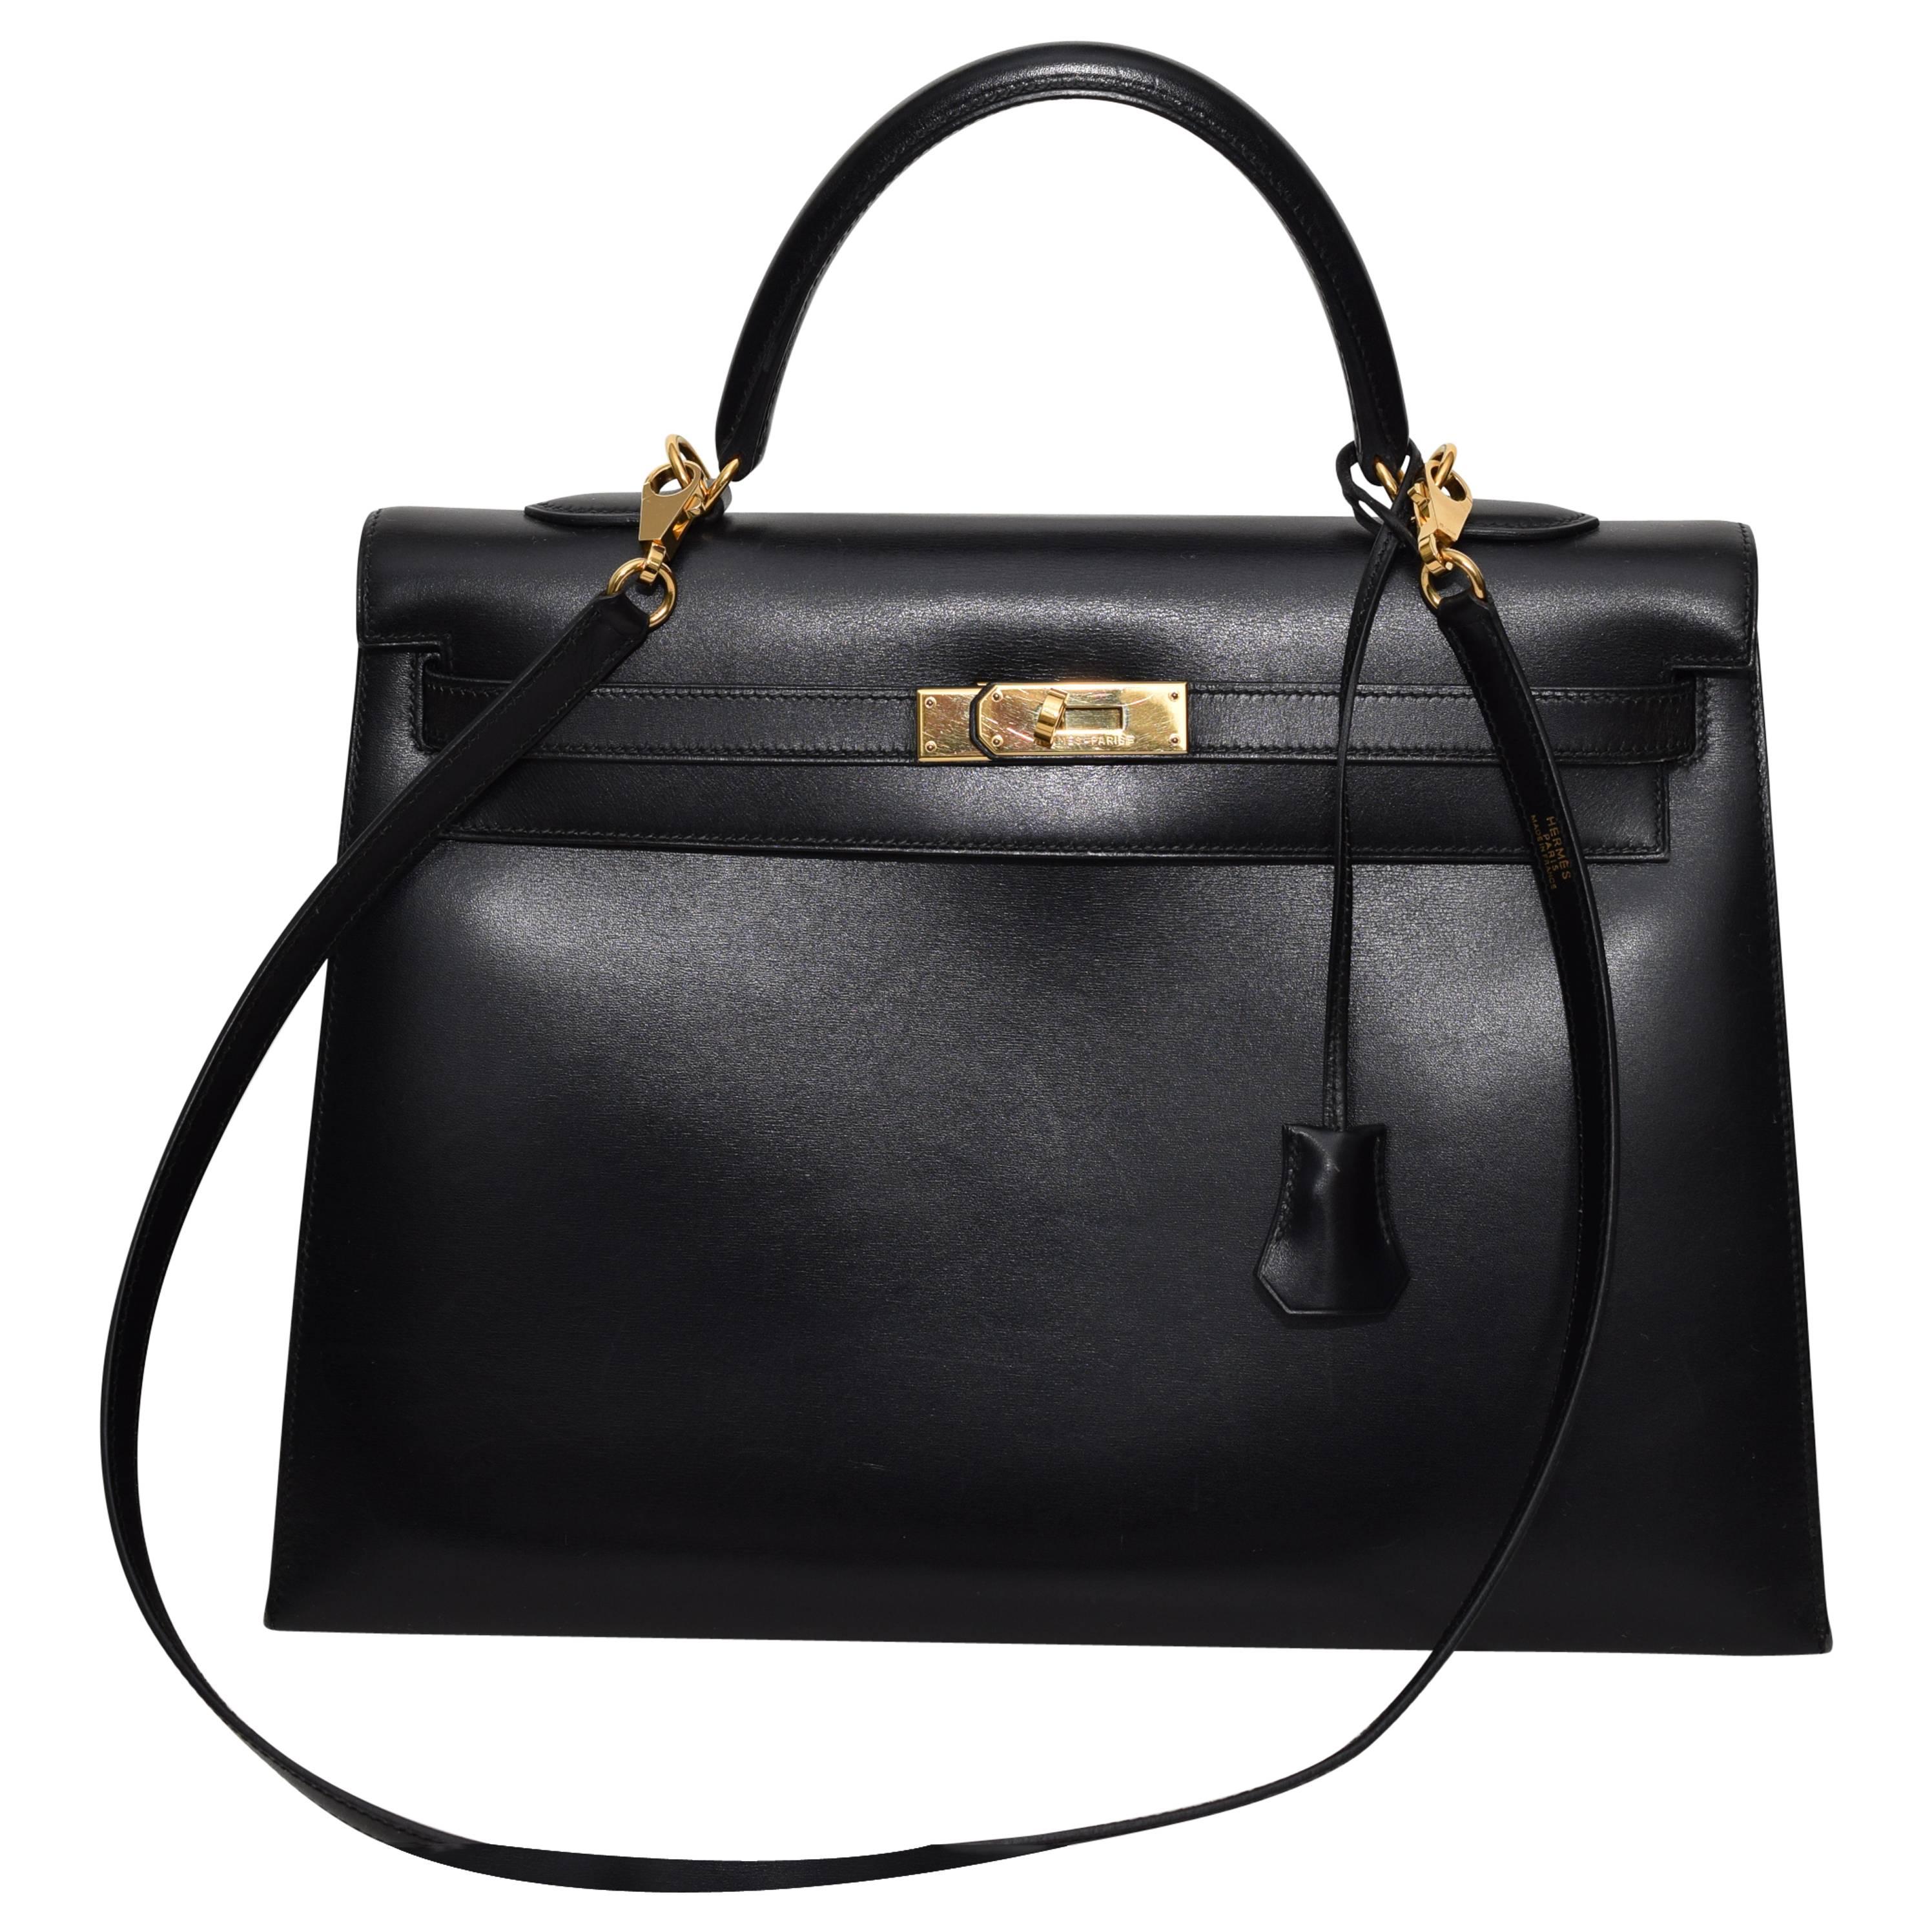 Herrmes Black Kelly 35cm in box leather with gold hardware.